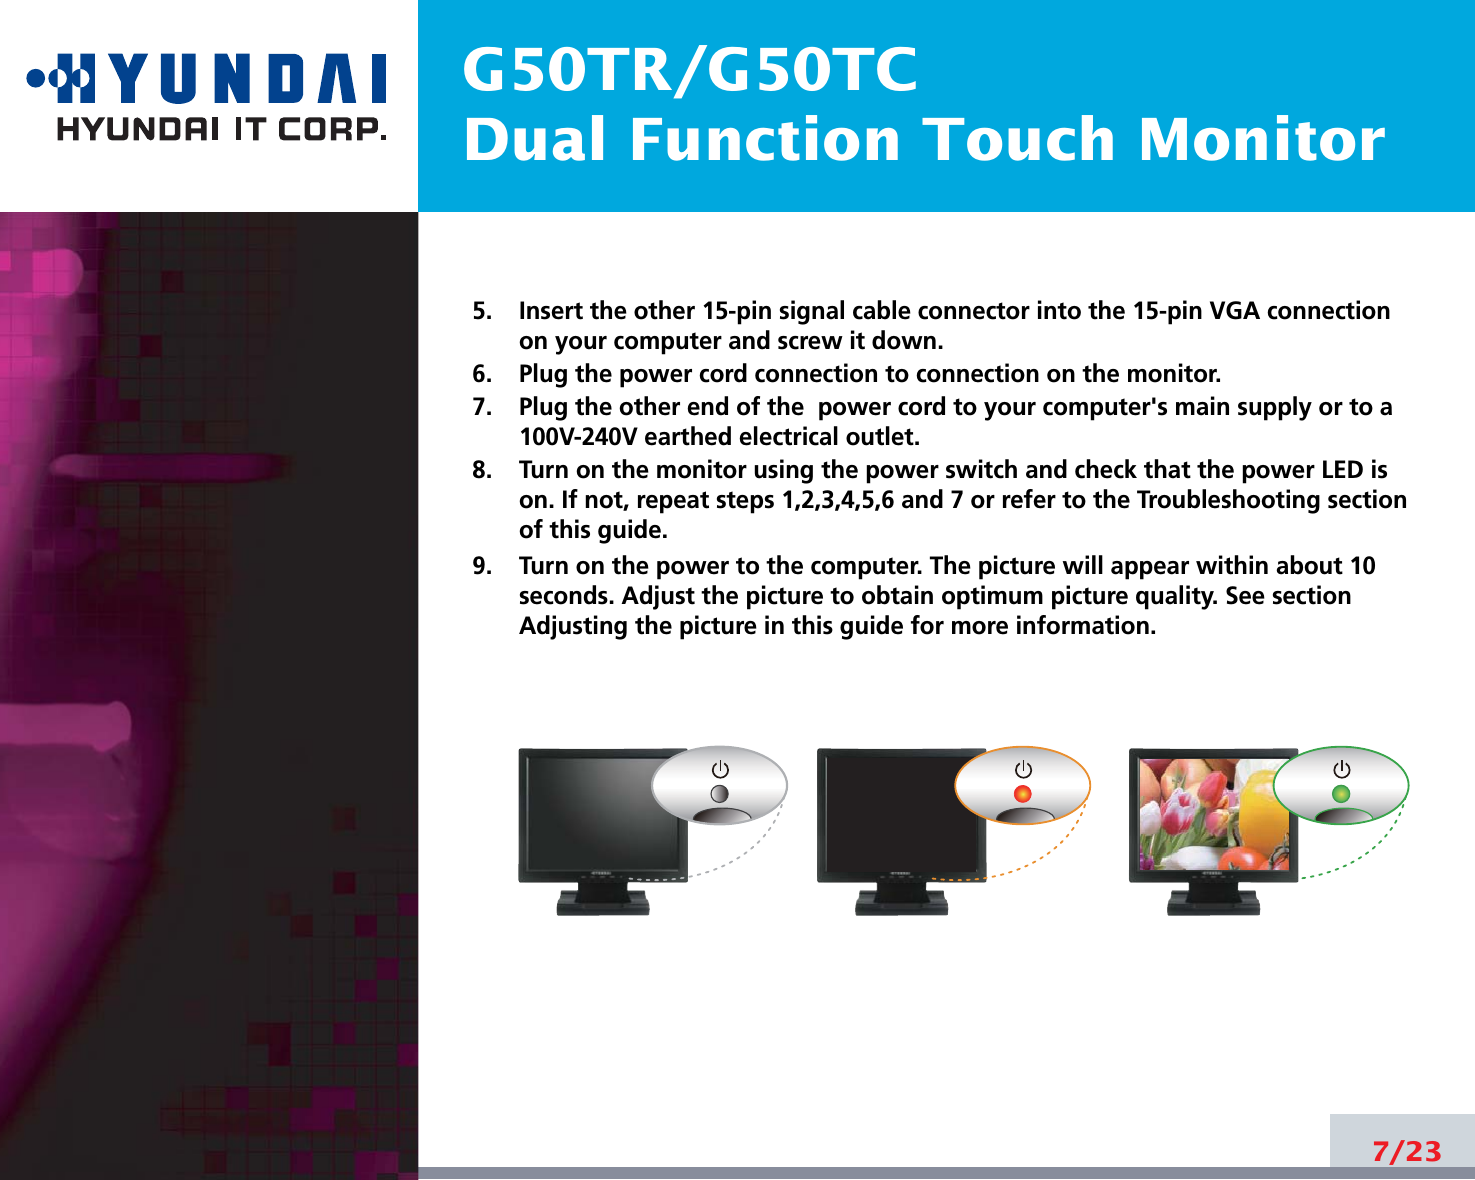 G50TR/G50TCDual Function Touch Monitor5.    Insert the other 15-pin signal cable connector into the 15-pin VGA connectionon your computer and screw it down. 6.    Plug the power cord connection to connection on the monitor.7.    Plug the other end of the  power cord to your computer&apos;s main supply or to a100V-240V earthed electrical outlet.8.    Turn on the monitor using the power switch and check that the power LED ison. If not, repeat steps 1,2,3,4,5,6 and 7 or refer to the Troubleshooting sectionof this guide.9.    Turn on the power to the computer. The picture will appear within about 10seconds. Adjust the picture to obtain optimum picture quality. See sectionAdjusting the picture in this guide for more information.7/23